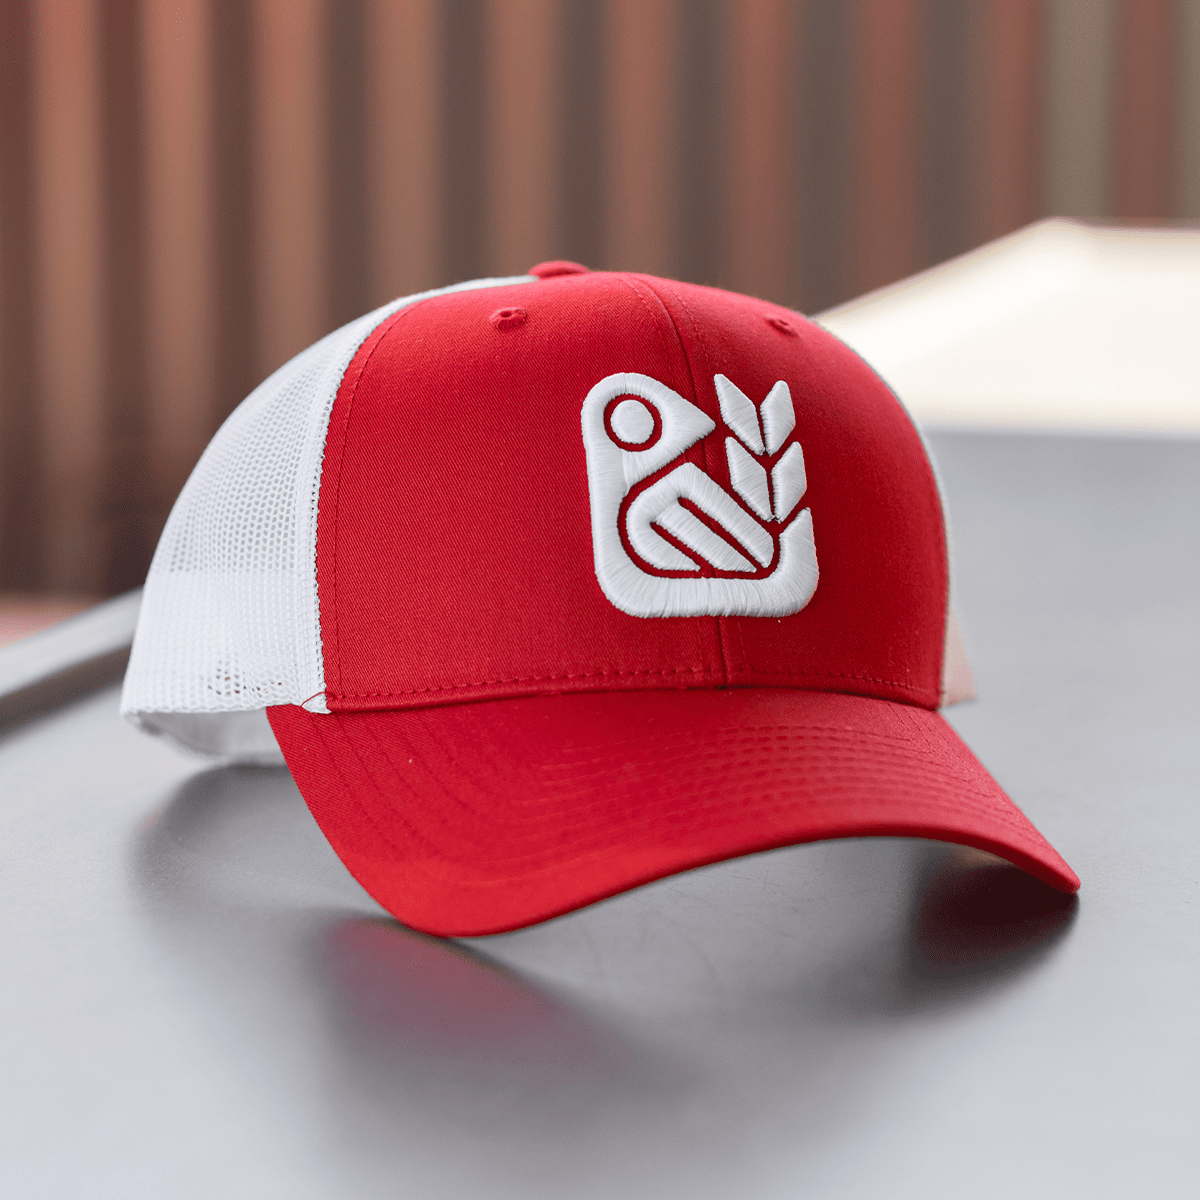 Red & White Snapback Hat - Red Bird Brewing